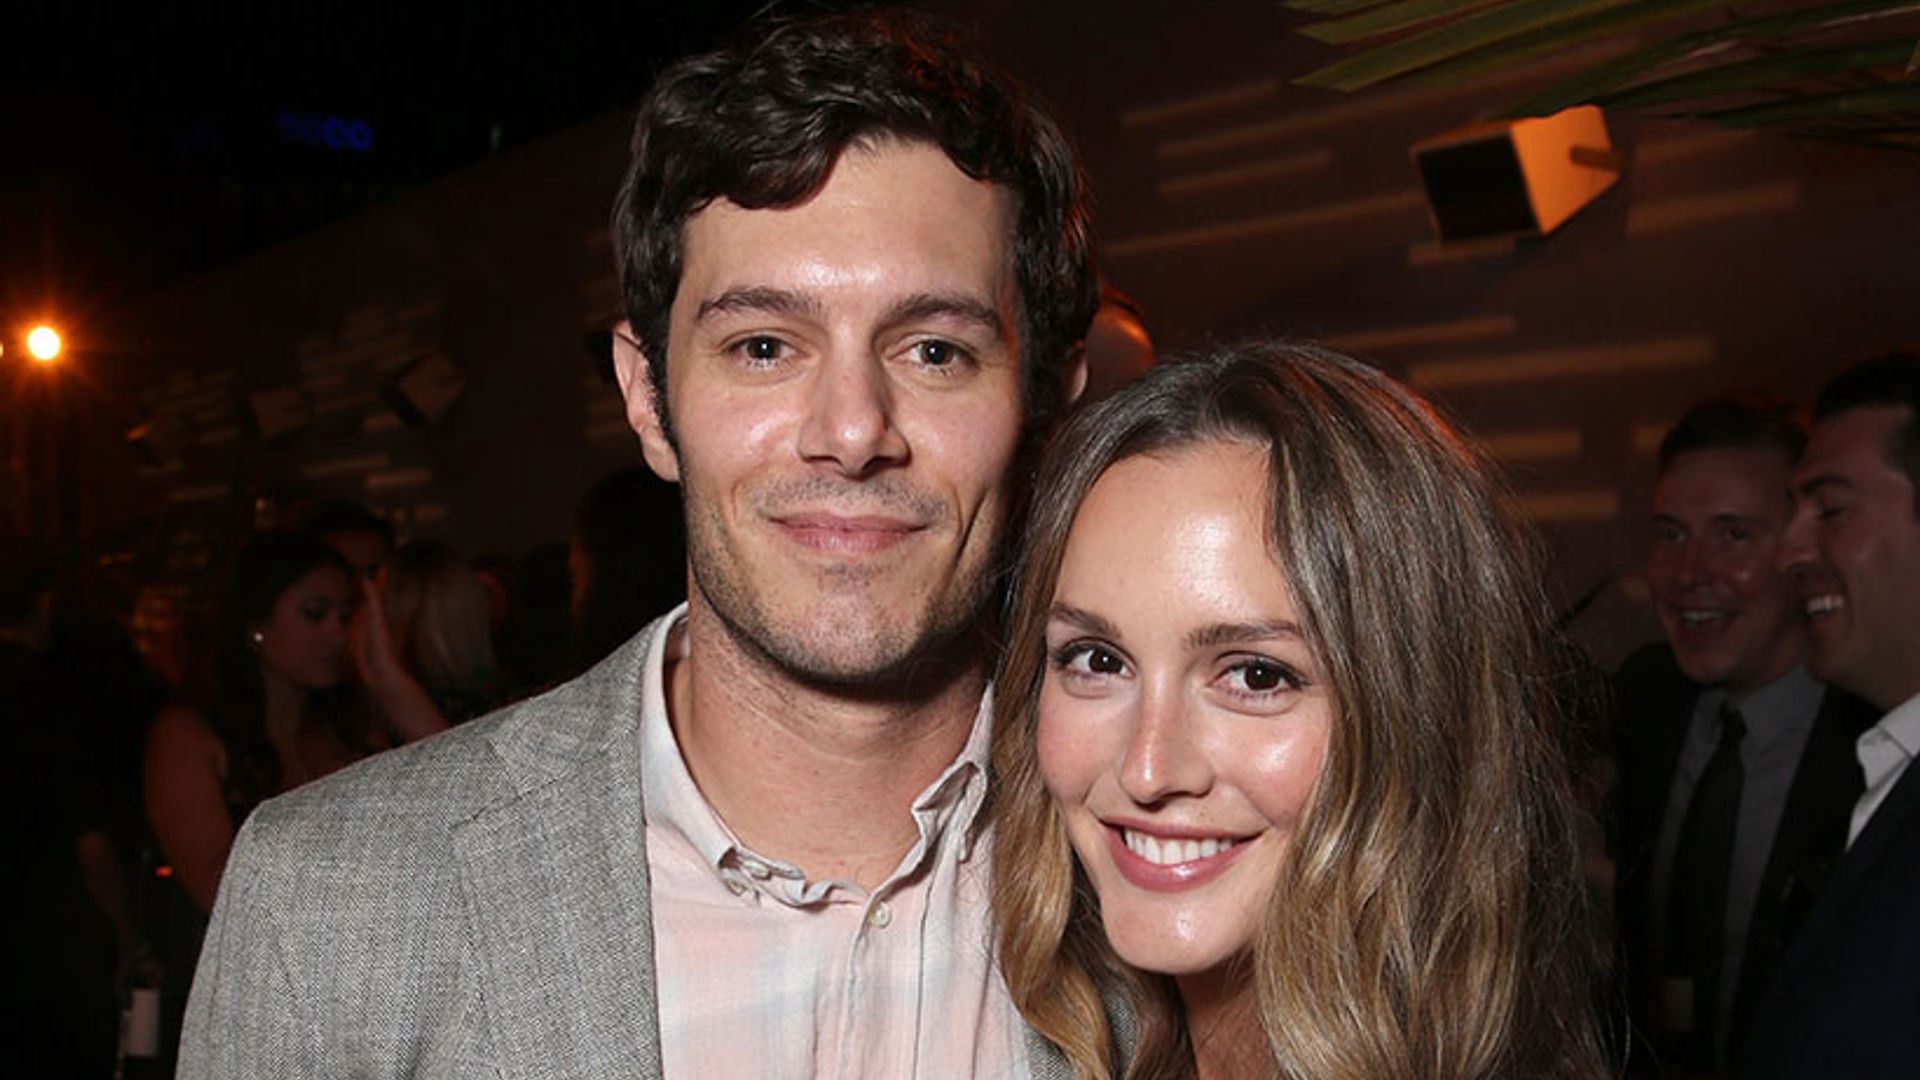 Leighton Meester and Adam Brody cuddle up during rare public outing together